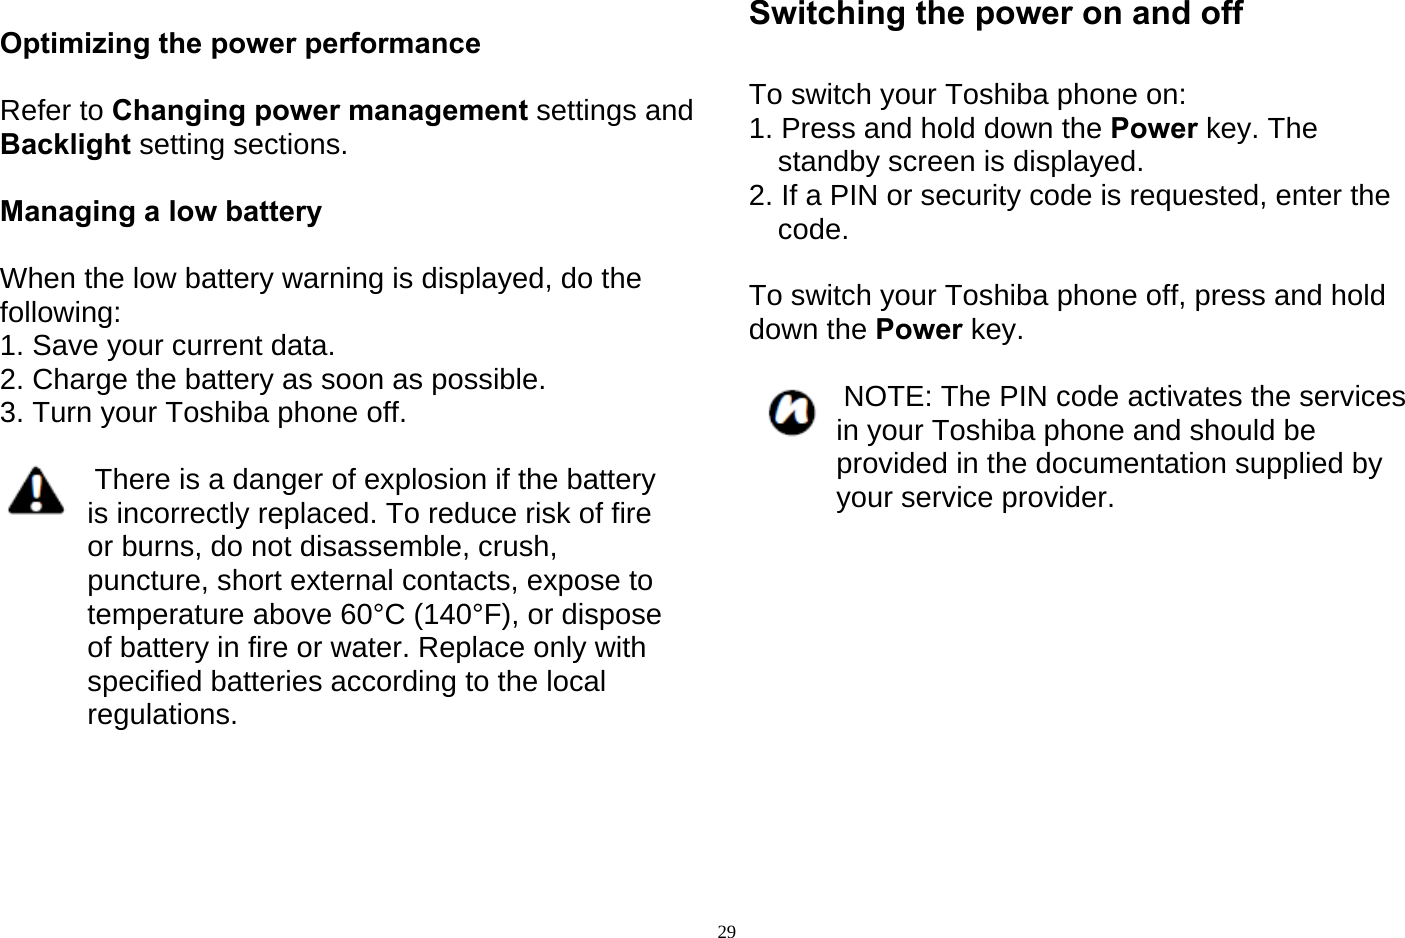   29 Optimizing the power performance  Refer to Changing power management settings and Backlight setting sections.  Managing a low battery  When the low battery warning is displayed, do the following: 1. Save your current data. 2. Charge the battery as soon as possible. 3. Turn your Toshiba phone off.   There is a danger of explosion if the battery is incorrectly replaced. To reduce risk of fire or burns, do not disassemble, crush, puncture, short external contacts, expose to temperature above 60°C (140°F), or dispose of battery in fire or water. Replace only with specified batteries according to the local regulations.     Switching the power on and off  To switch your Toshiba phone on: 1. Press and hold down the Power key. The standby screen is displayed. 2. If a PIN or security code is requested, enter the code.  To switch your Toshiba phone off, press and hold down the Power key.   NOTE: The PIN code activates the services in your Toshiba phone and should be provided in the documentation supplied by your service provider.          